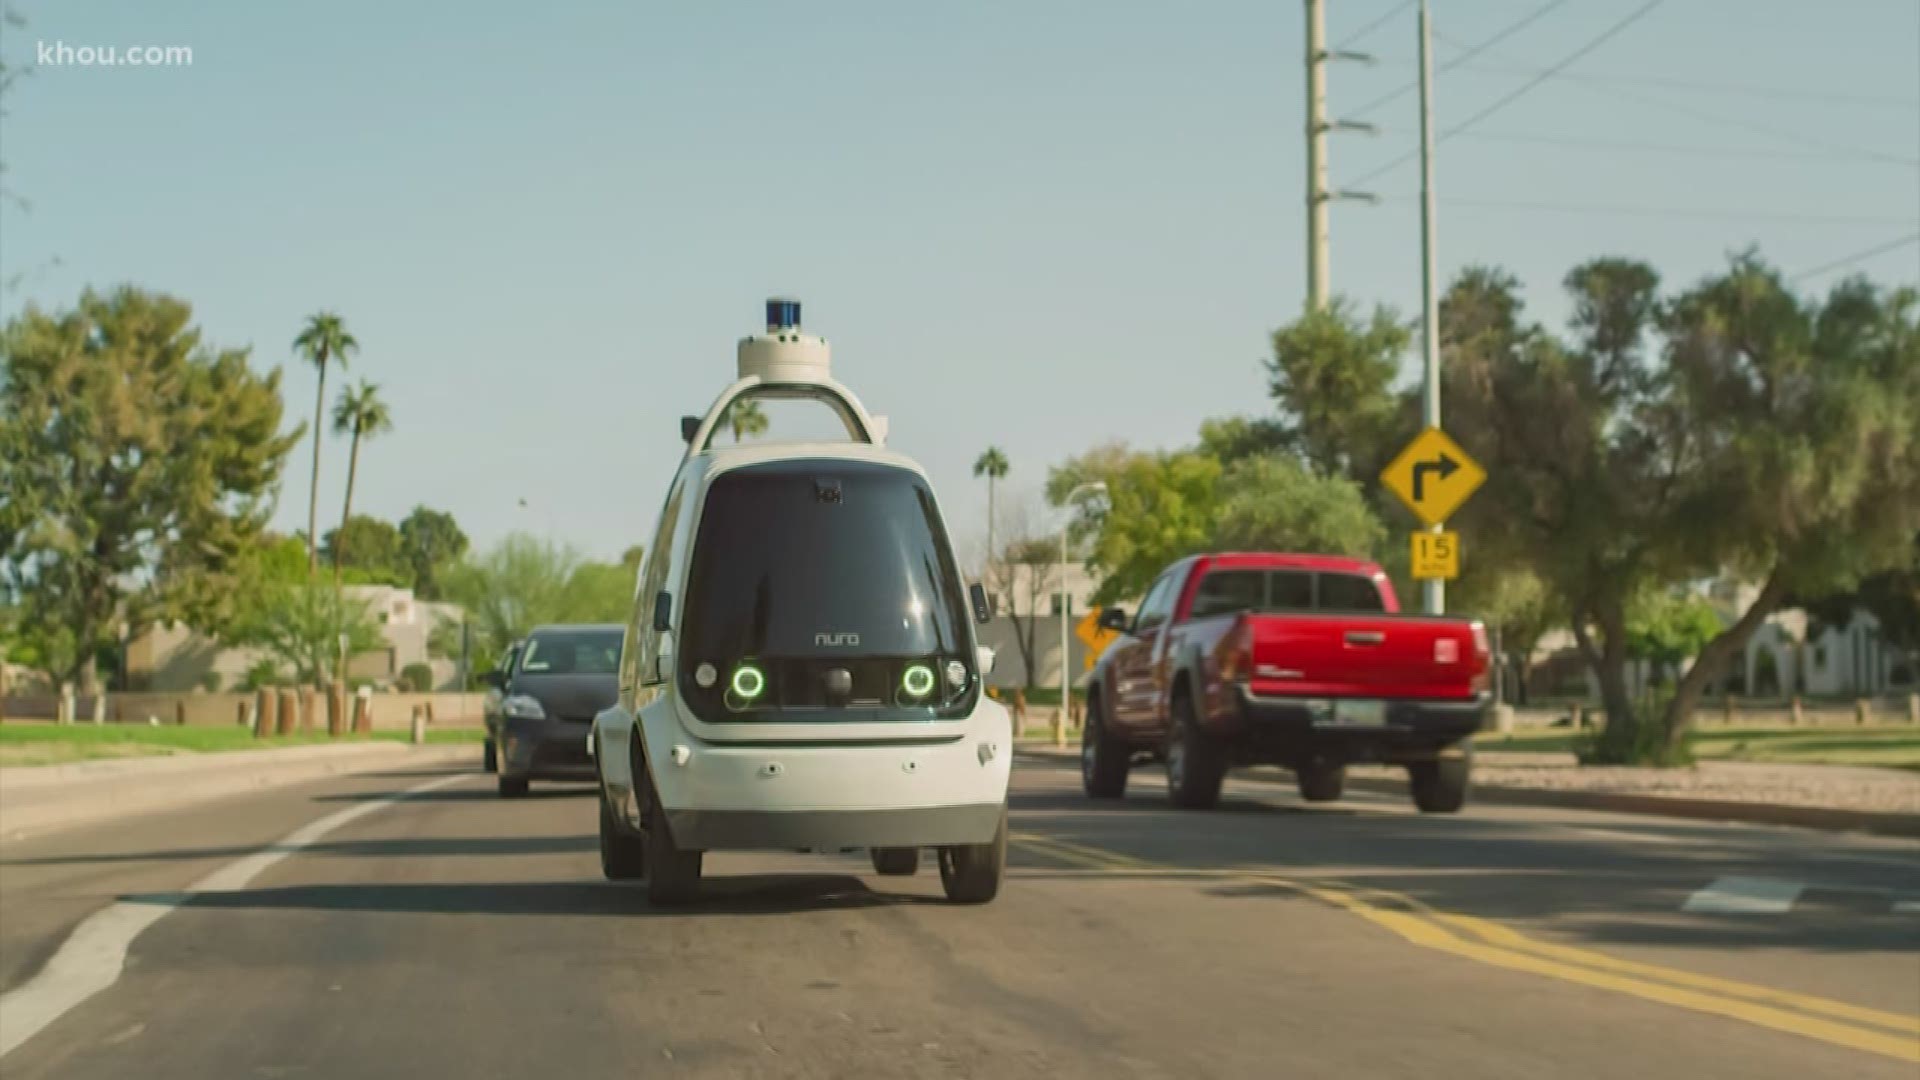 From curbside pick-up to home delivery, hassle-free grocery shopping is taking over. Now you can get groceries straight to your porch with a driverless vehicle.